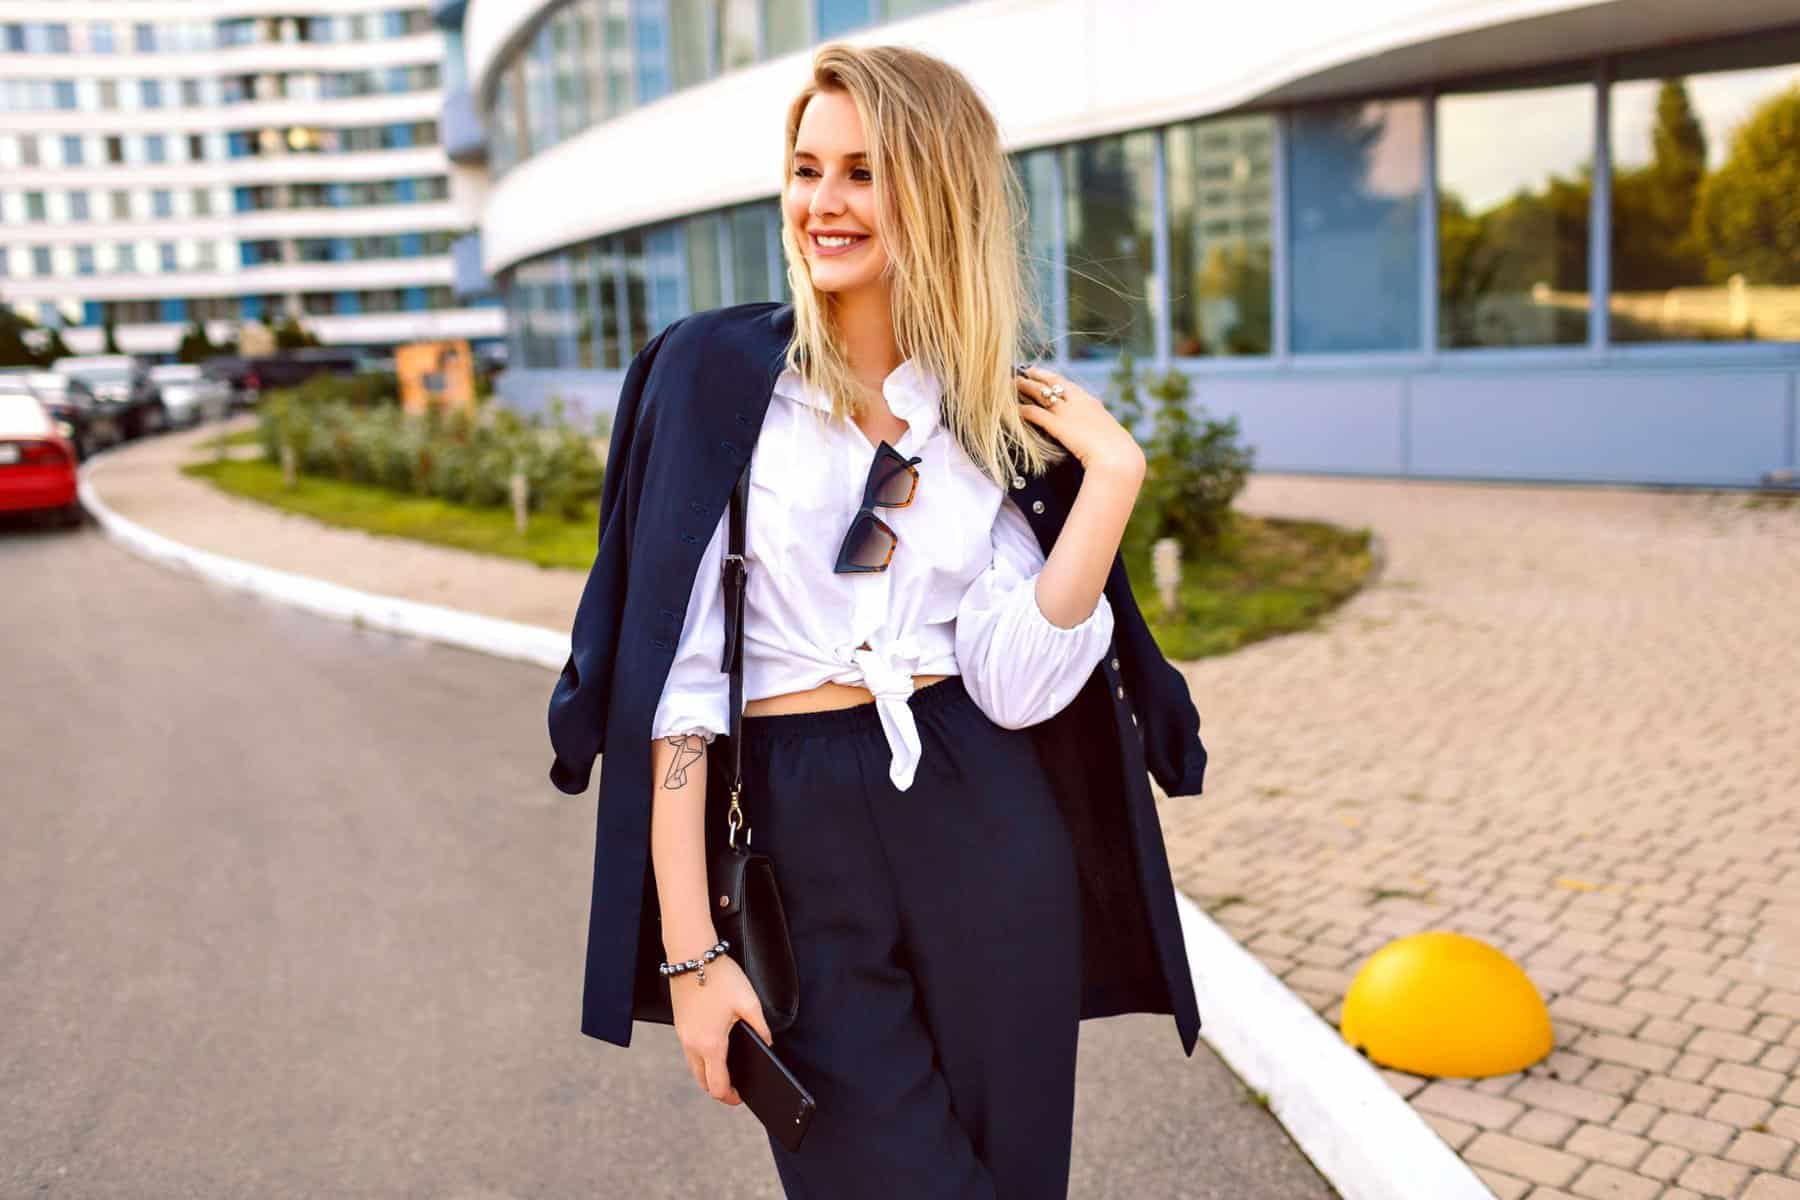 Top Ladies Vest Suit Ideas, Tips and Inspiration To Keep The Trend Going